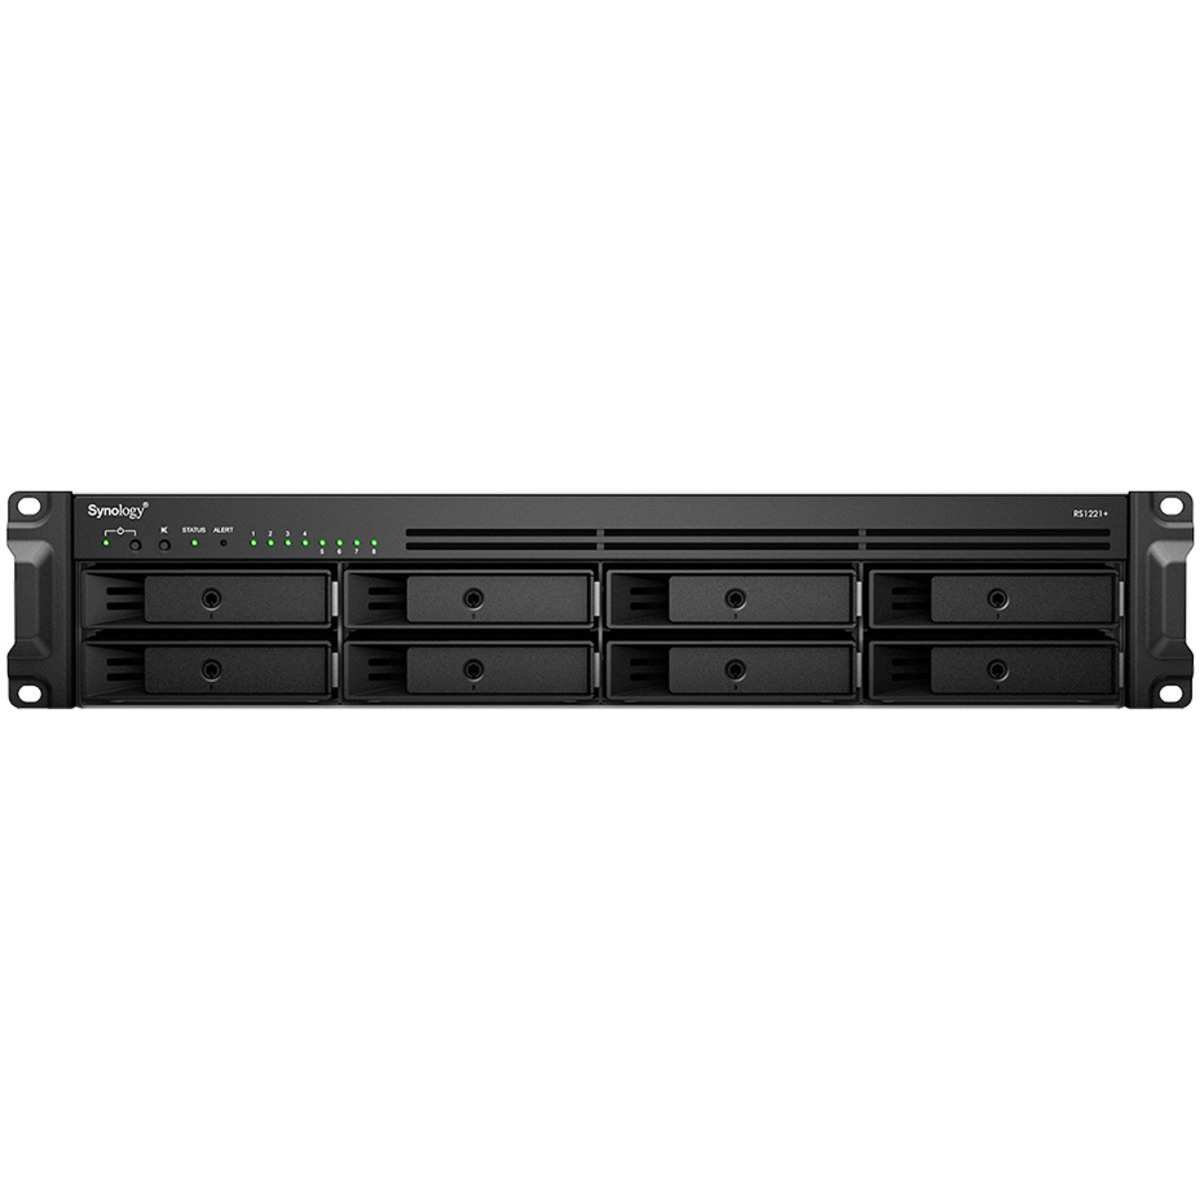 Synology RackStation RS1221+ 56tb 8-Bay RackMount Multimedia / Power User / Business NAS - Network Attached Storage Device 4x14tb Western Digital Ultrastar DC HC530 WUH721414ALE6L4 3.5 7200rpm SATA 6Gb/s HDD ENTERPRISE Class Drives Installed - Burn-In Tested RackStation RS1221+